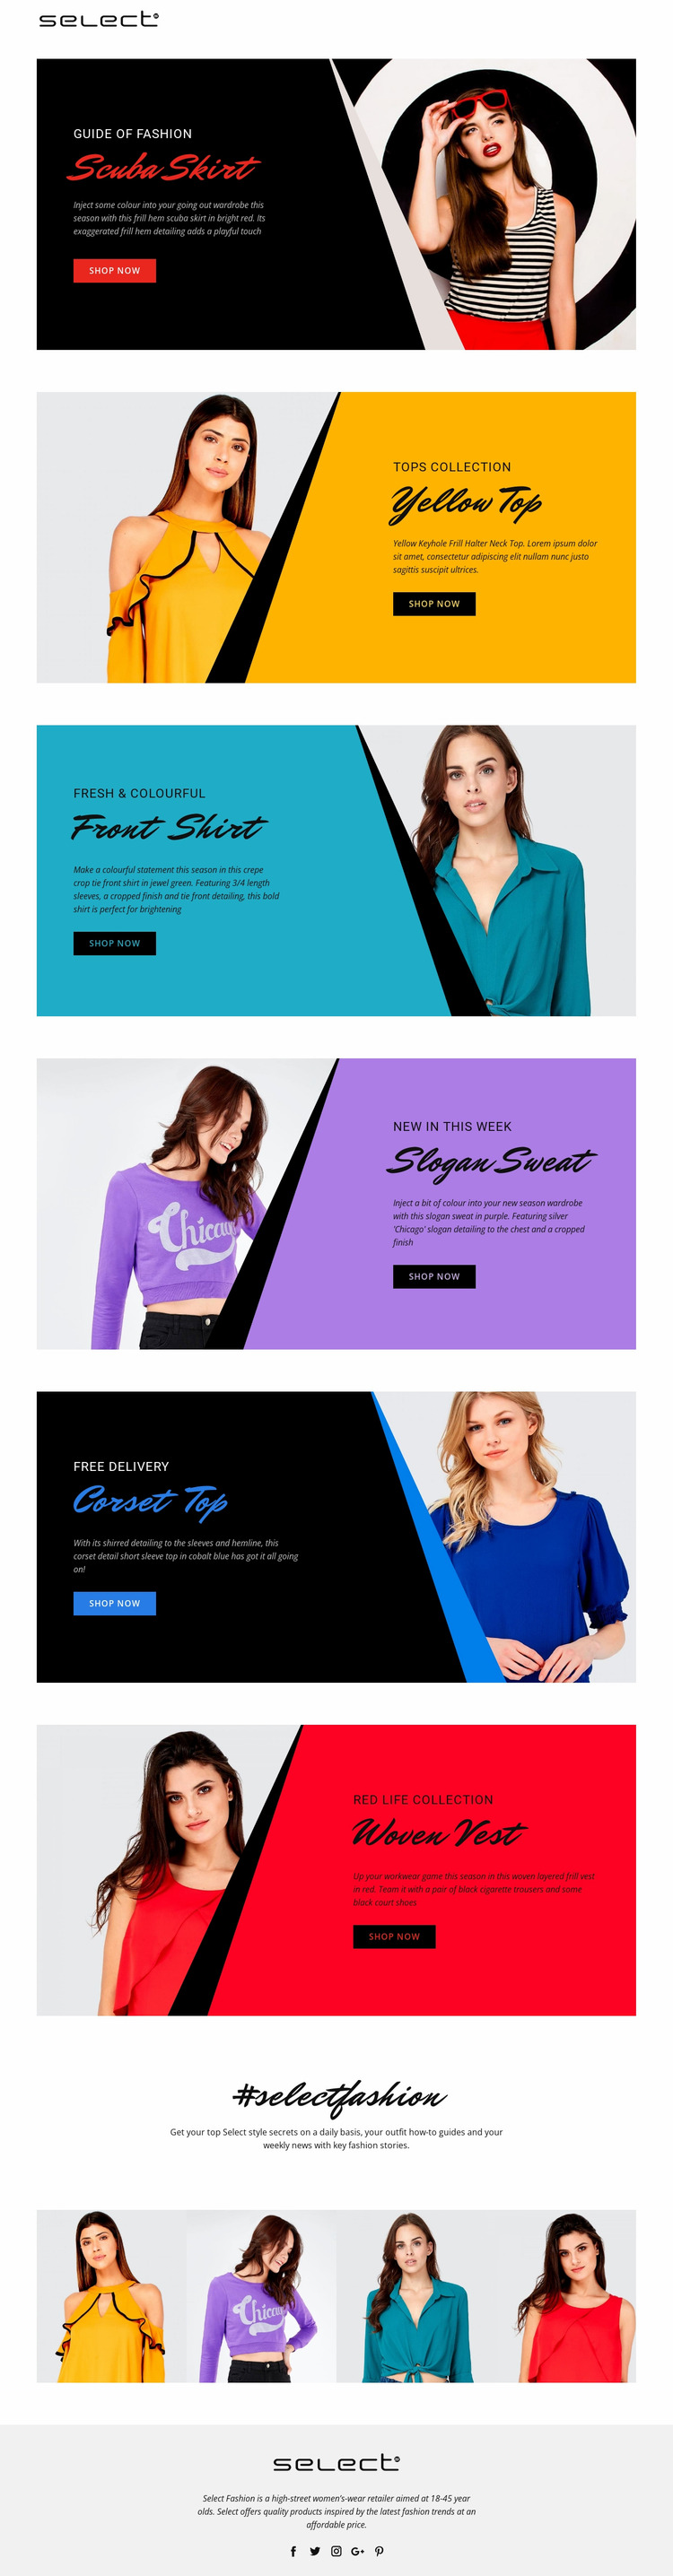 Learn about dress codes Website Mockup